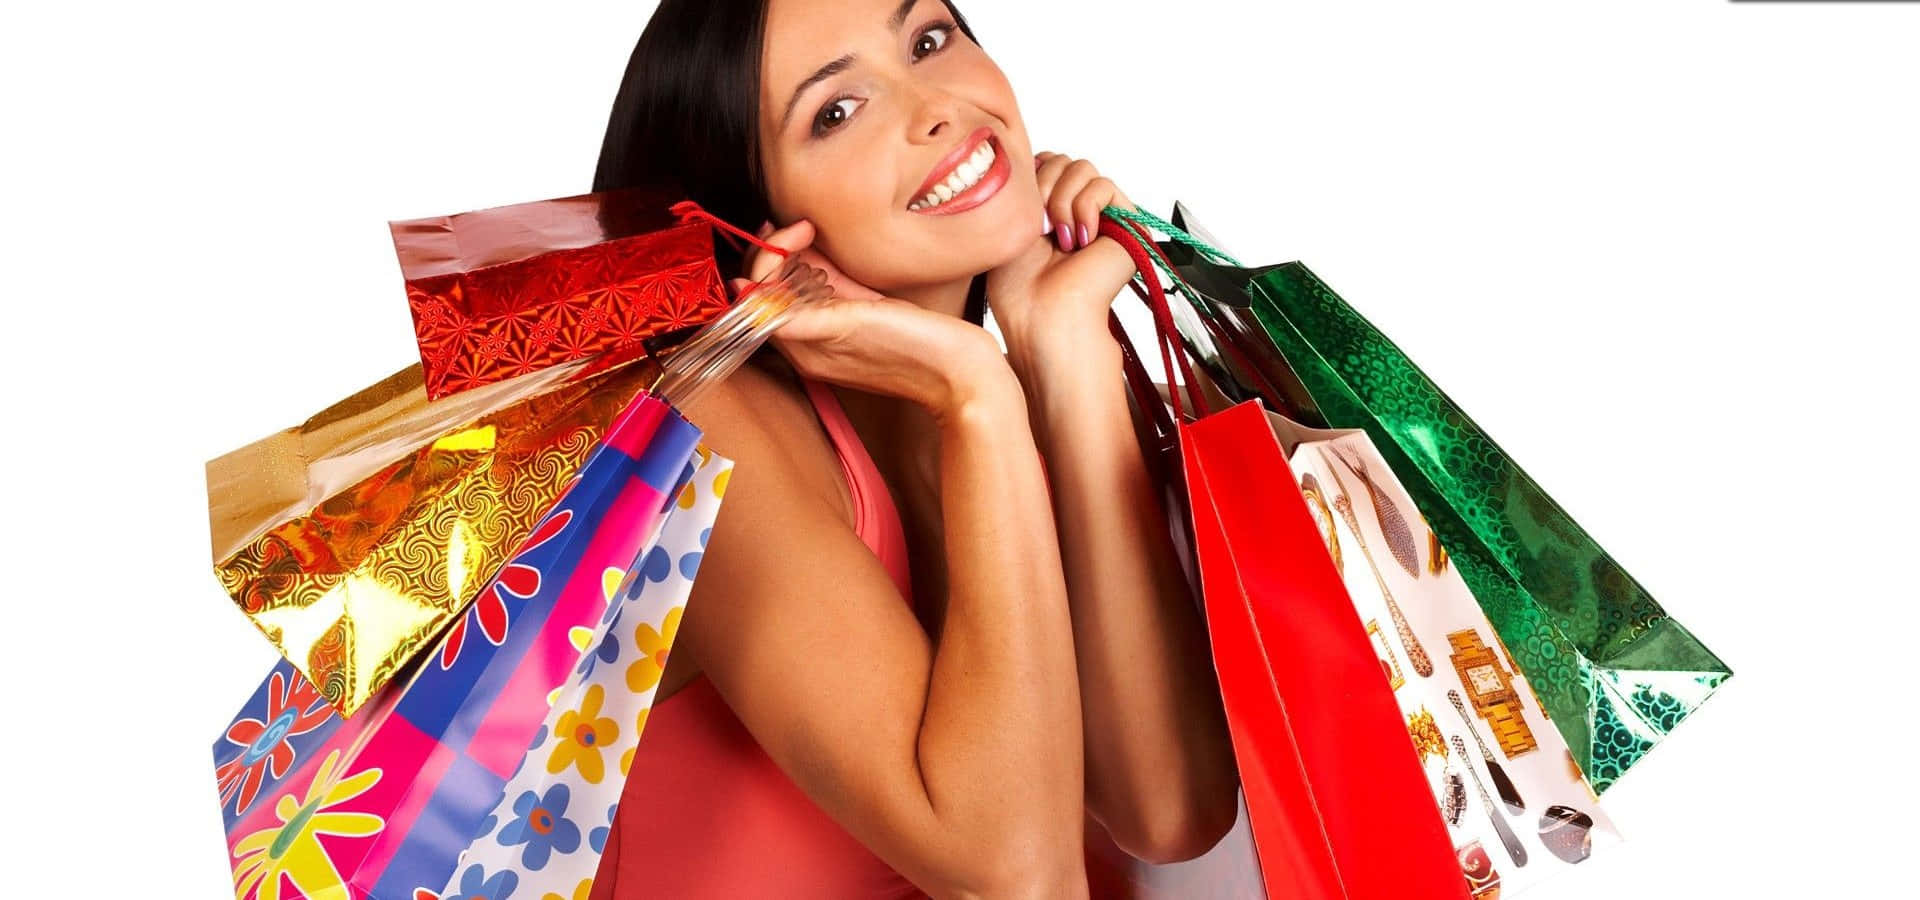 Enjoy Shopping In A Bright and Fun Environment.